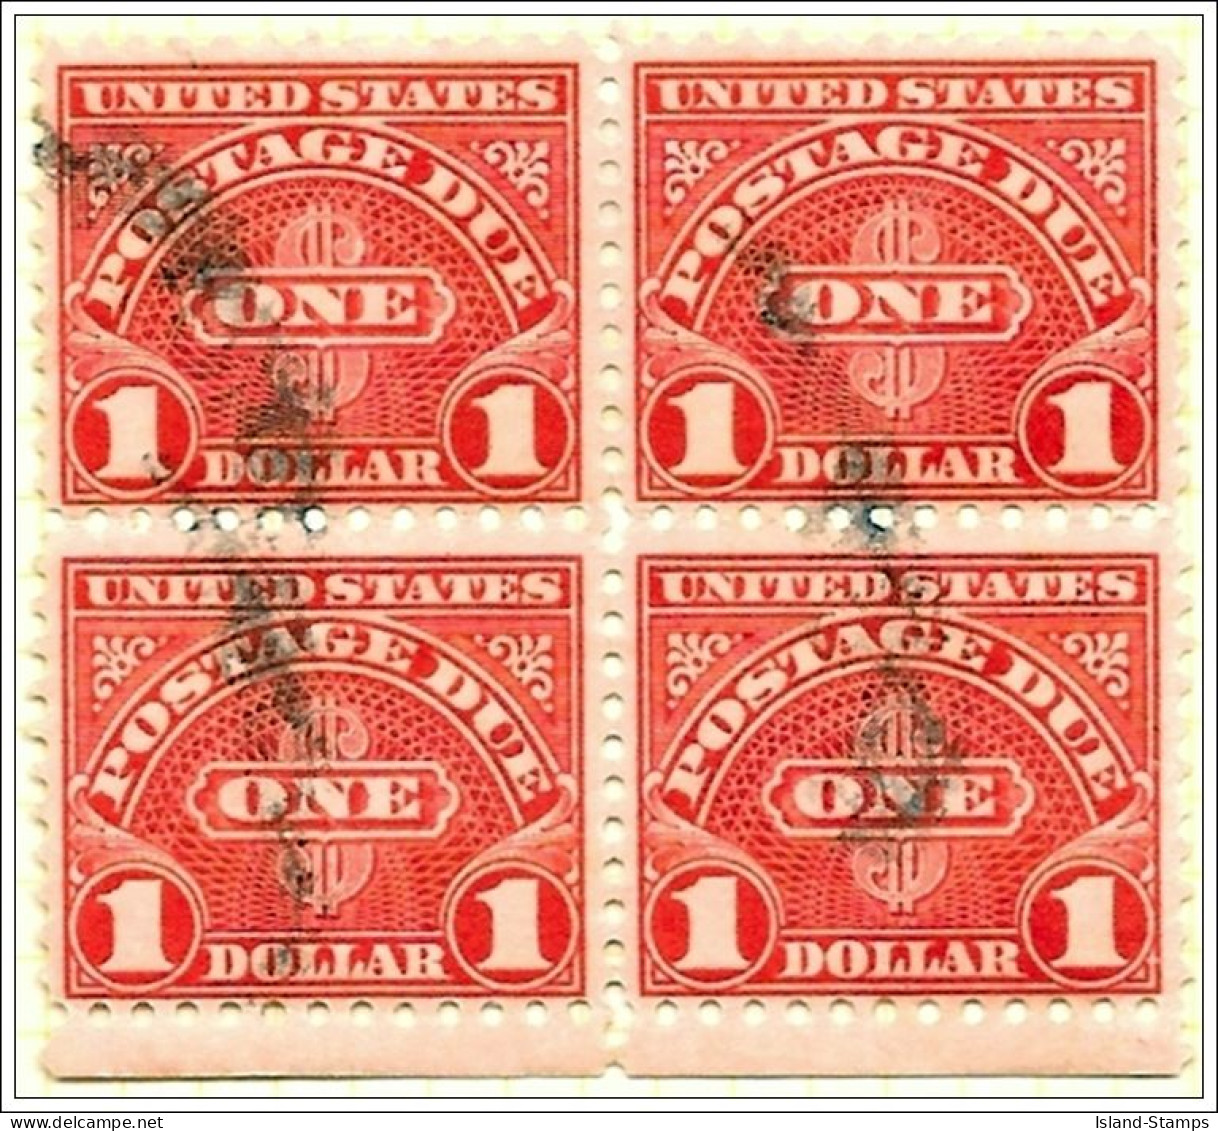 USA 1930/31 Block Of Four $1 Postage Dues Used - Used Stamps